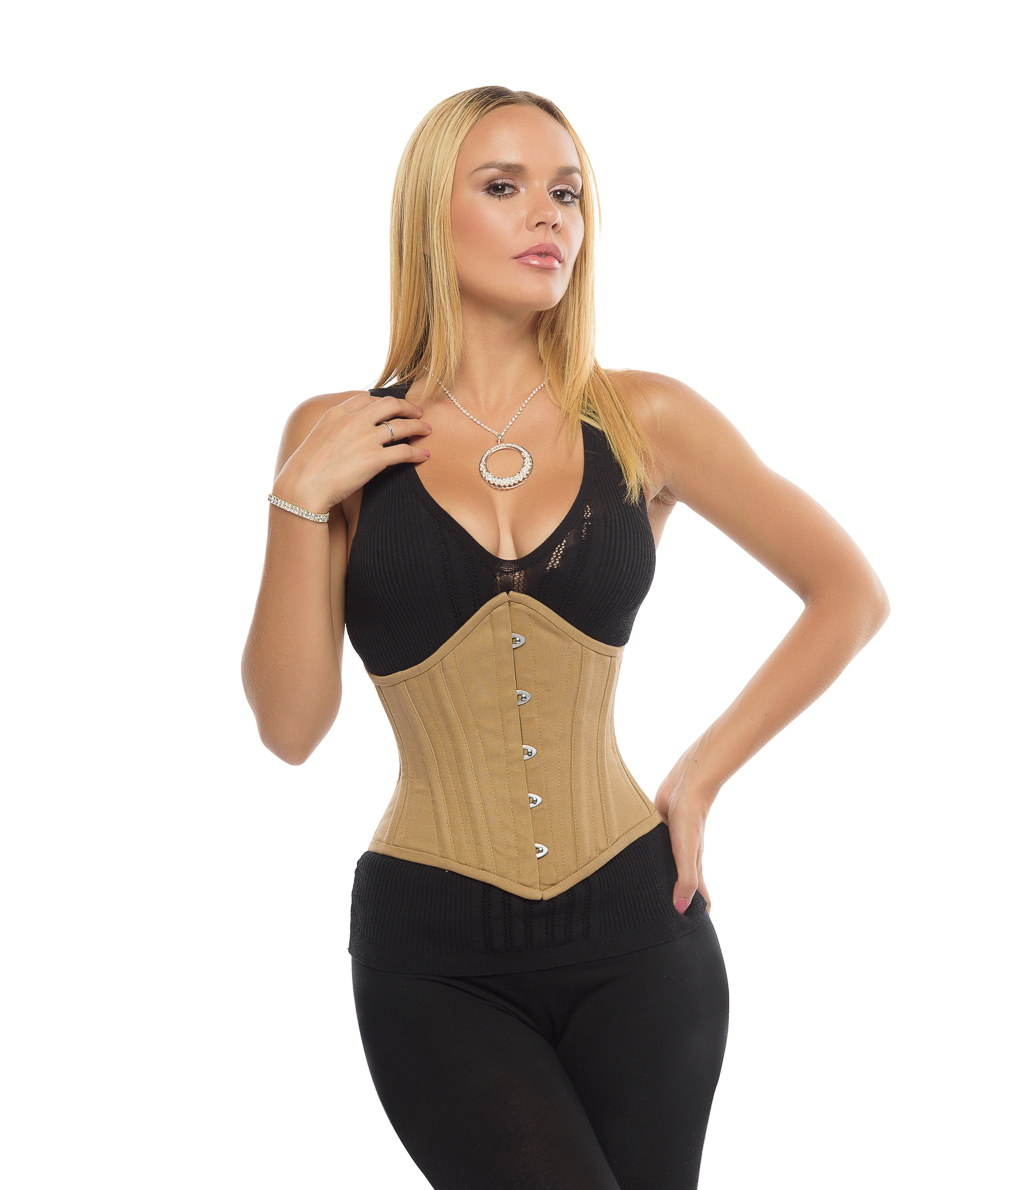 Real Steel Boned Underbust Corset From Blue Transparent Mesh and Cotton.  Real Waist Training Corset for Tight Lacing. 